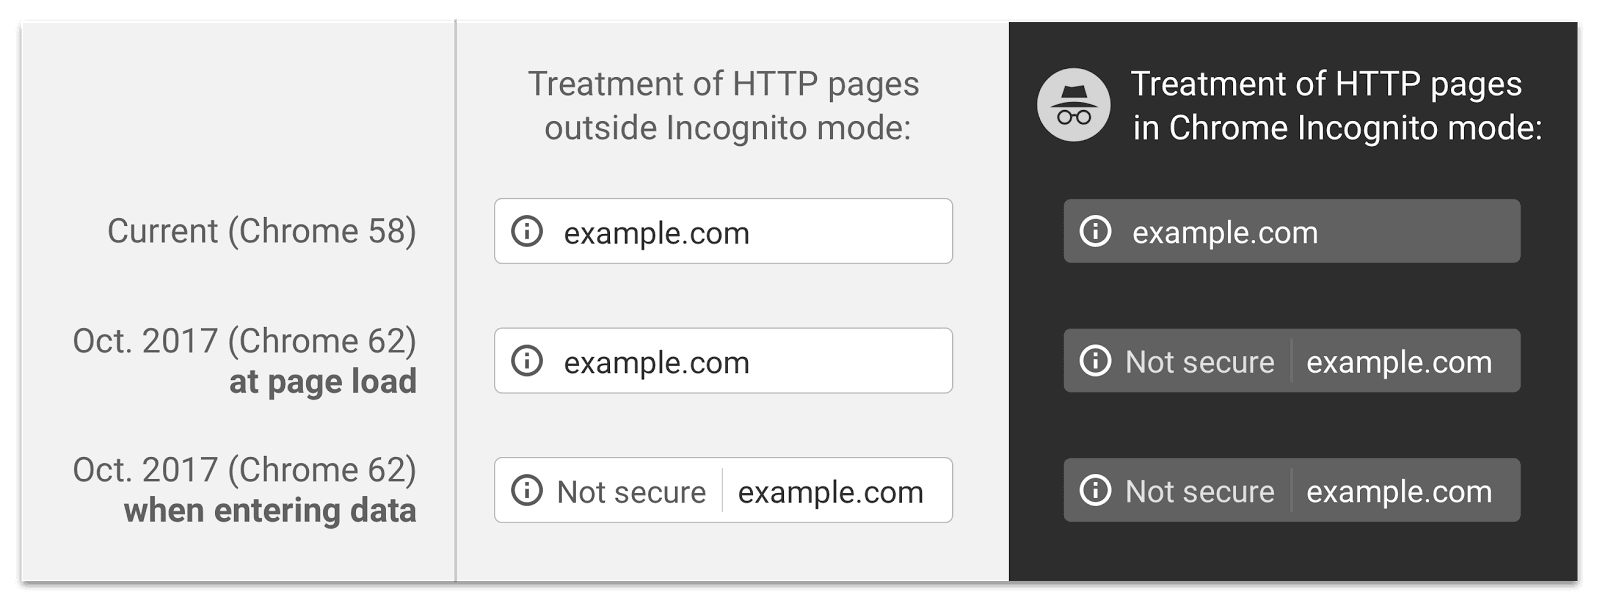 Treatment of HTTP Pages in Chrome 62